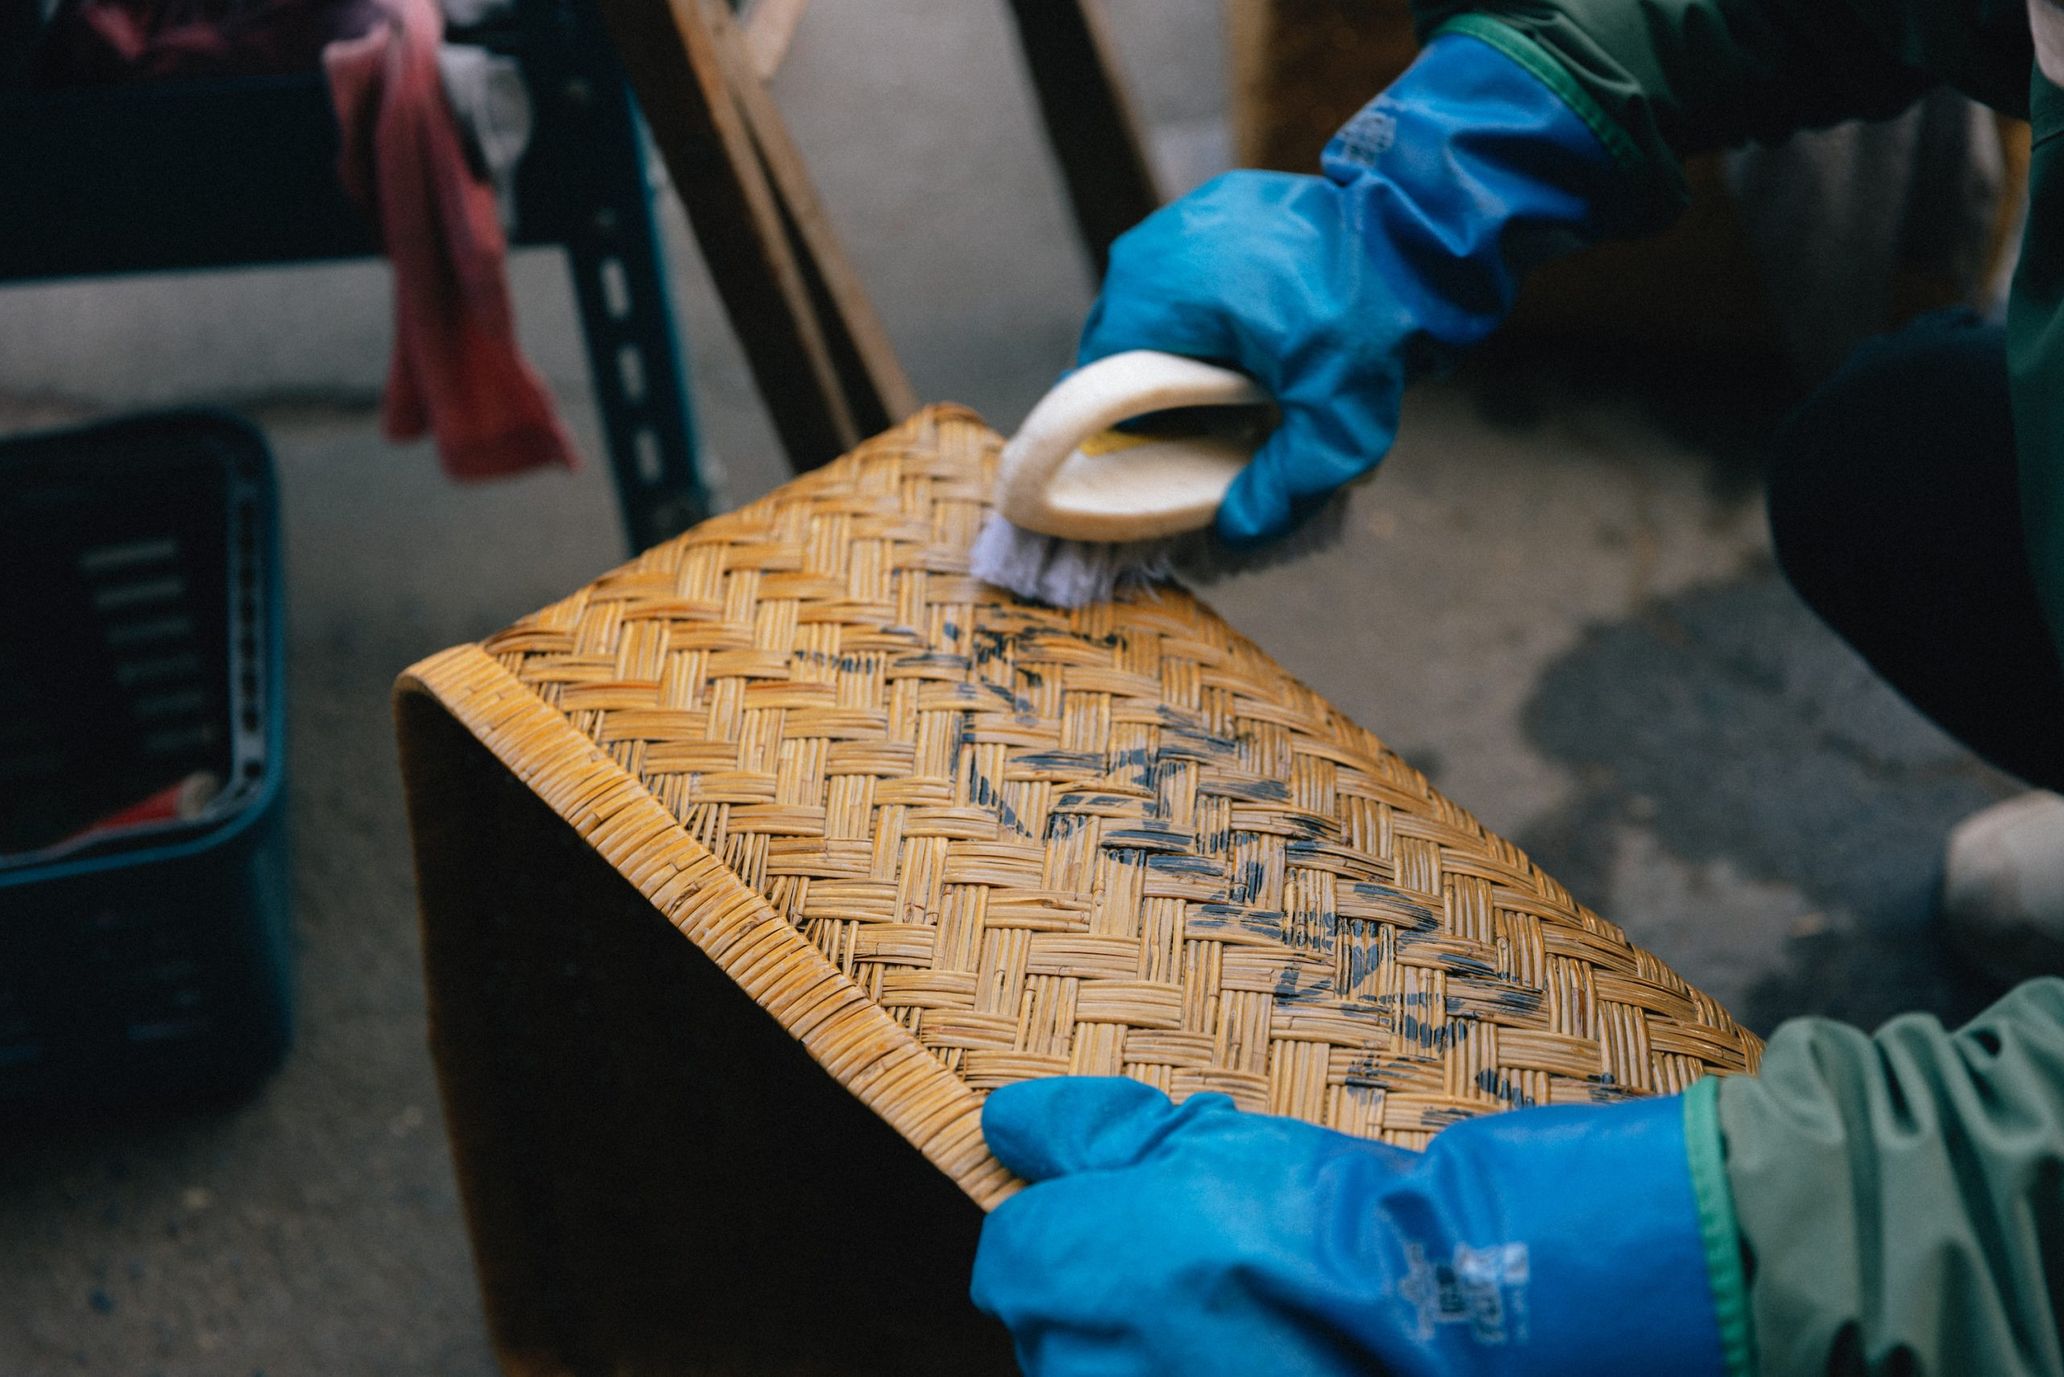 Reclaimed materials and antique tools are manually cleaned meticulously one by one by staff and supporters